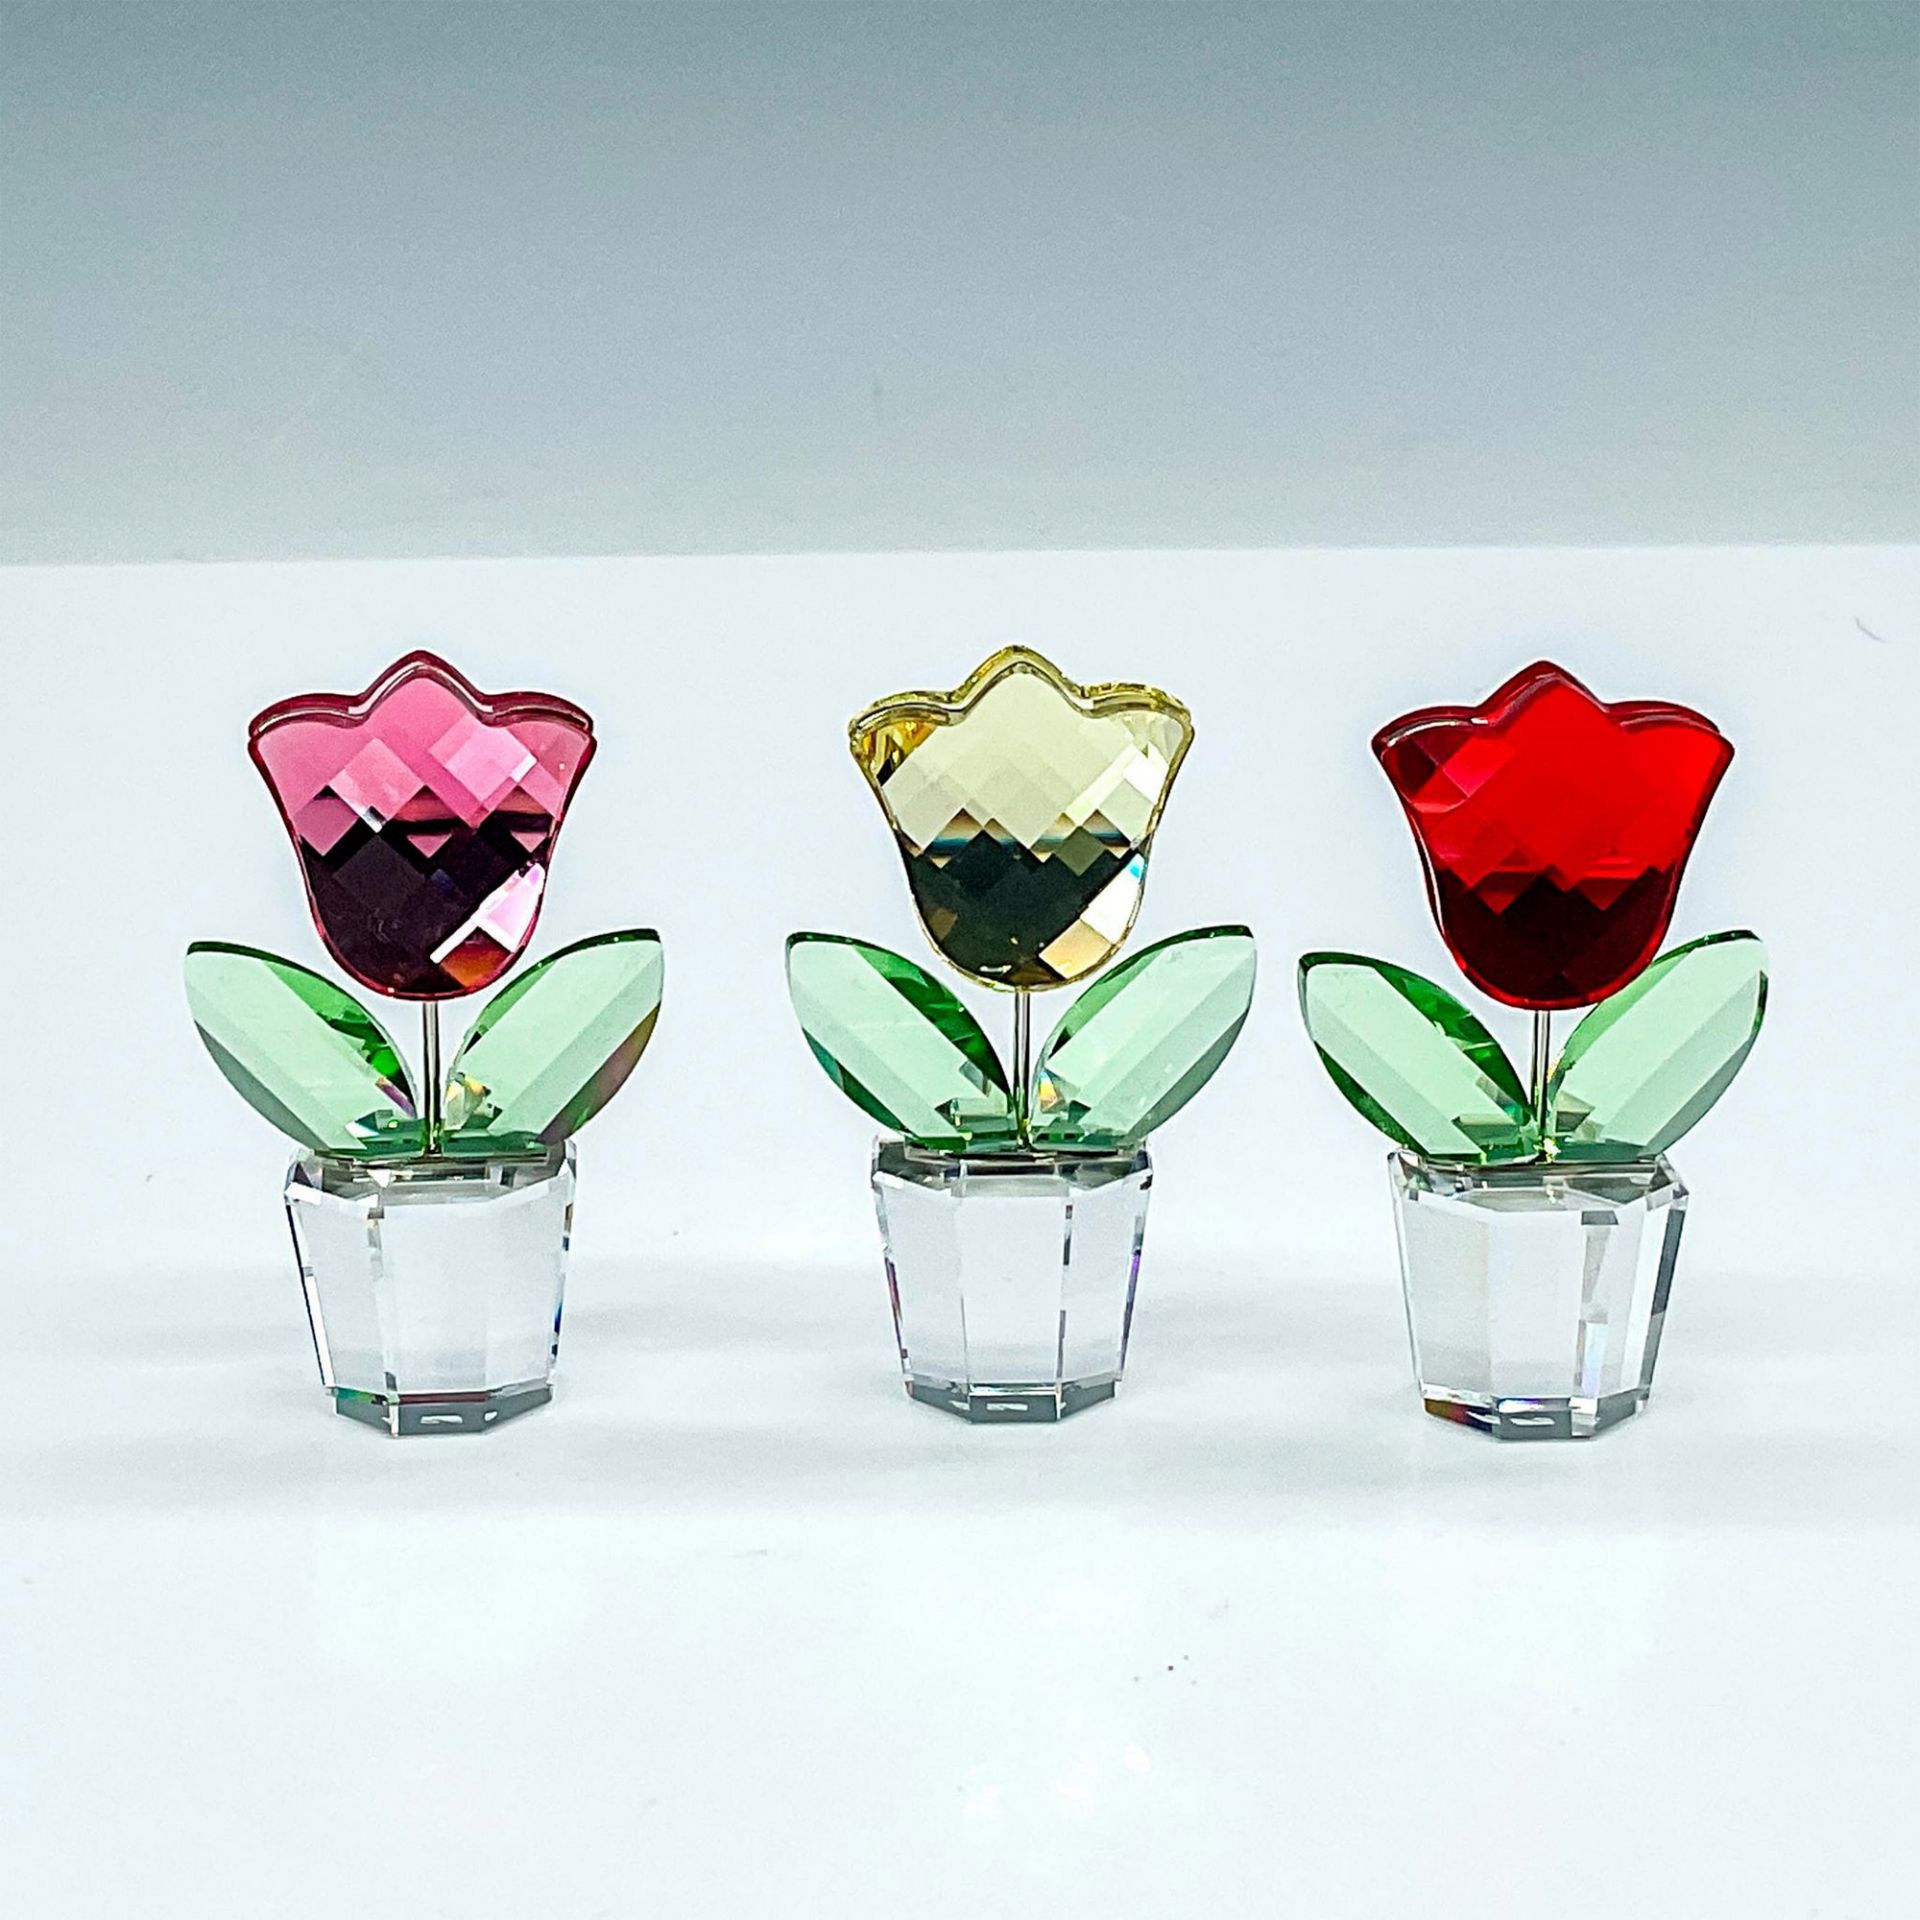 3pc Swarovski Crystal Flowers, Colored Tulips in Pots - Image 2 of 4